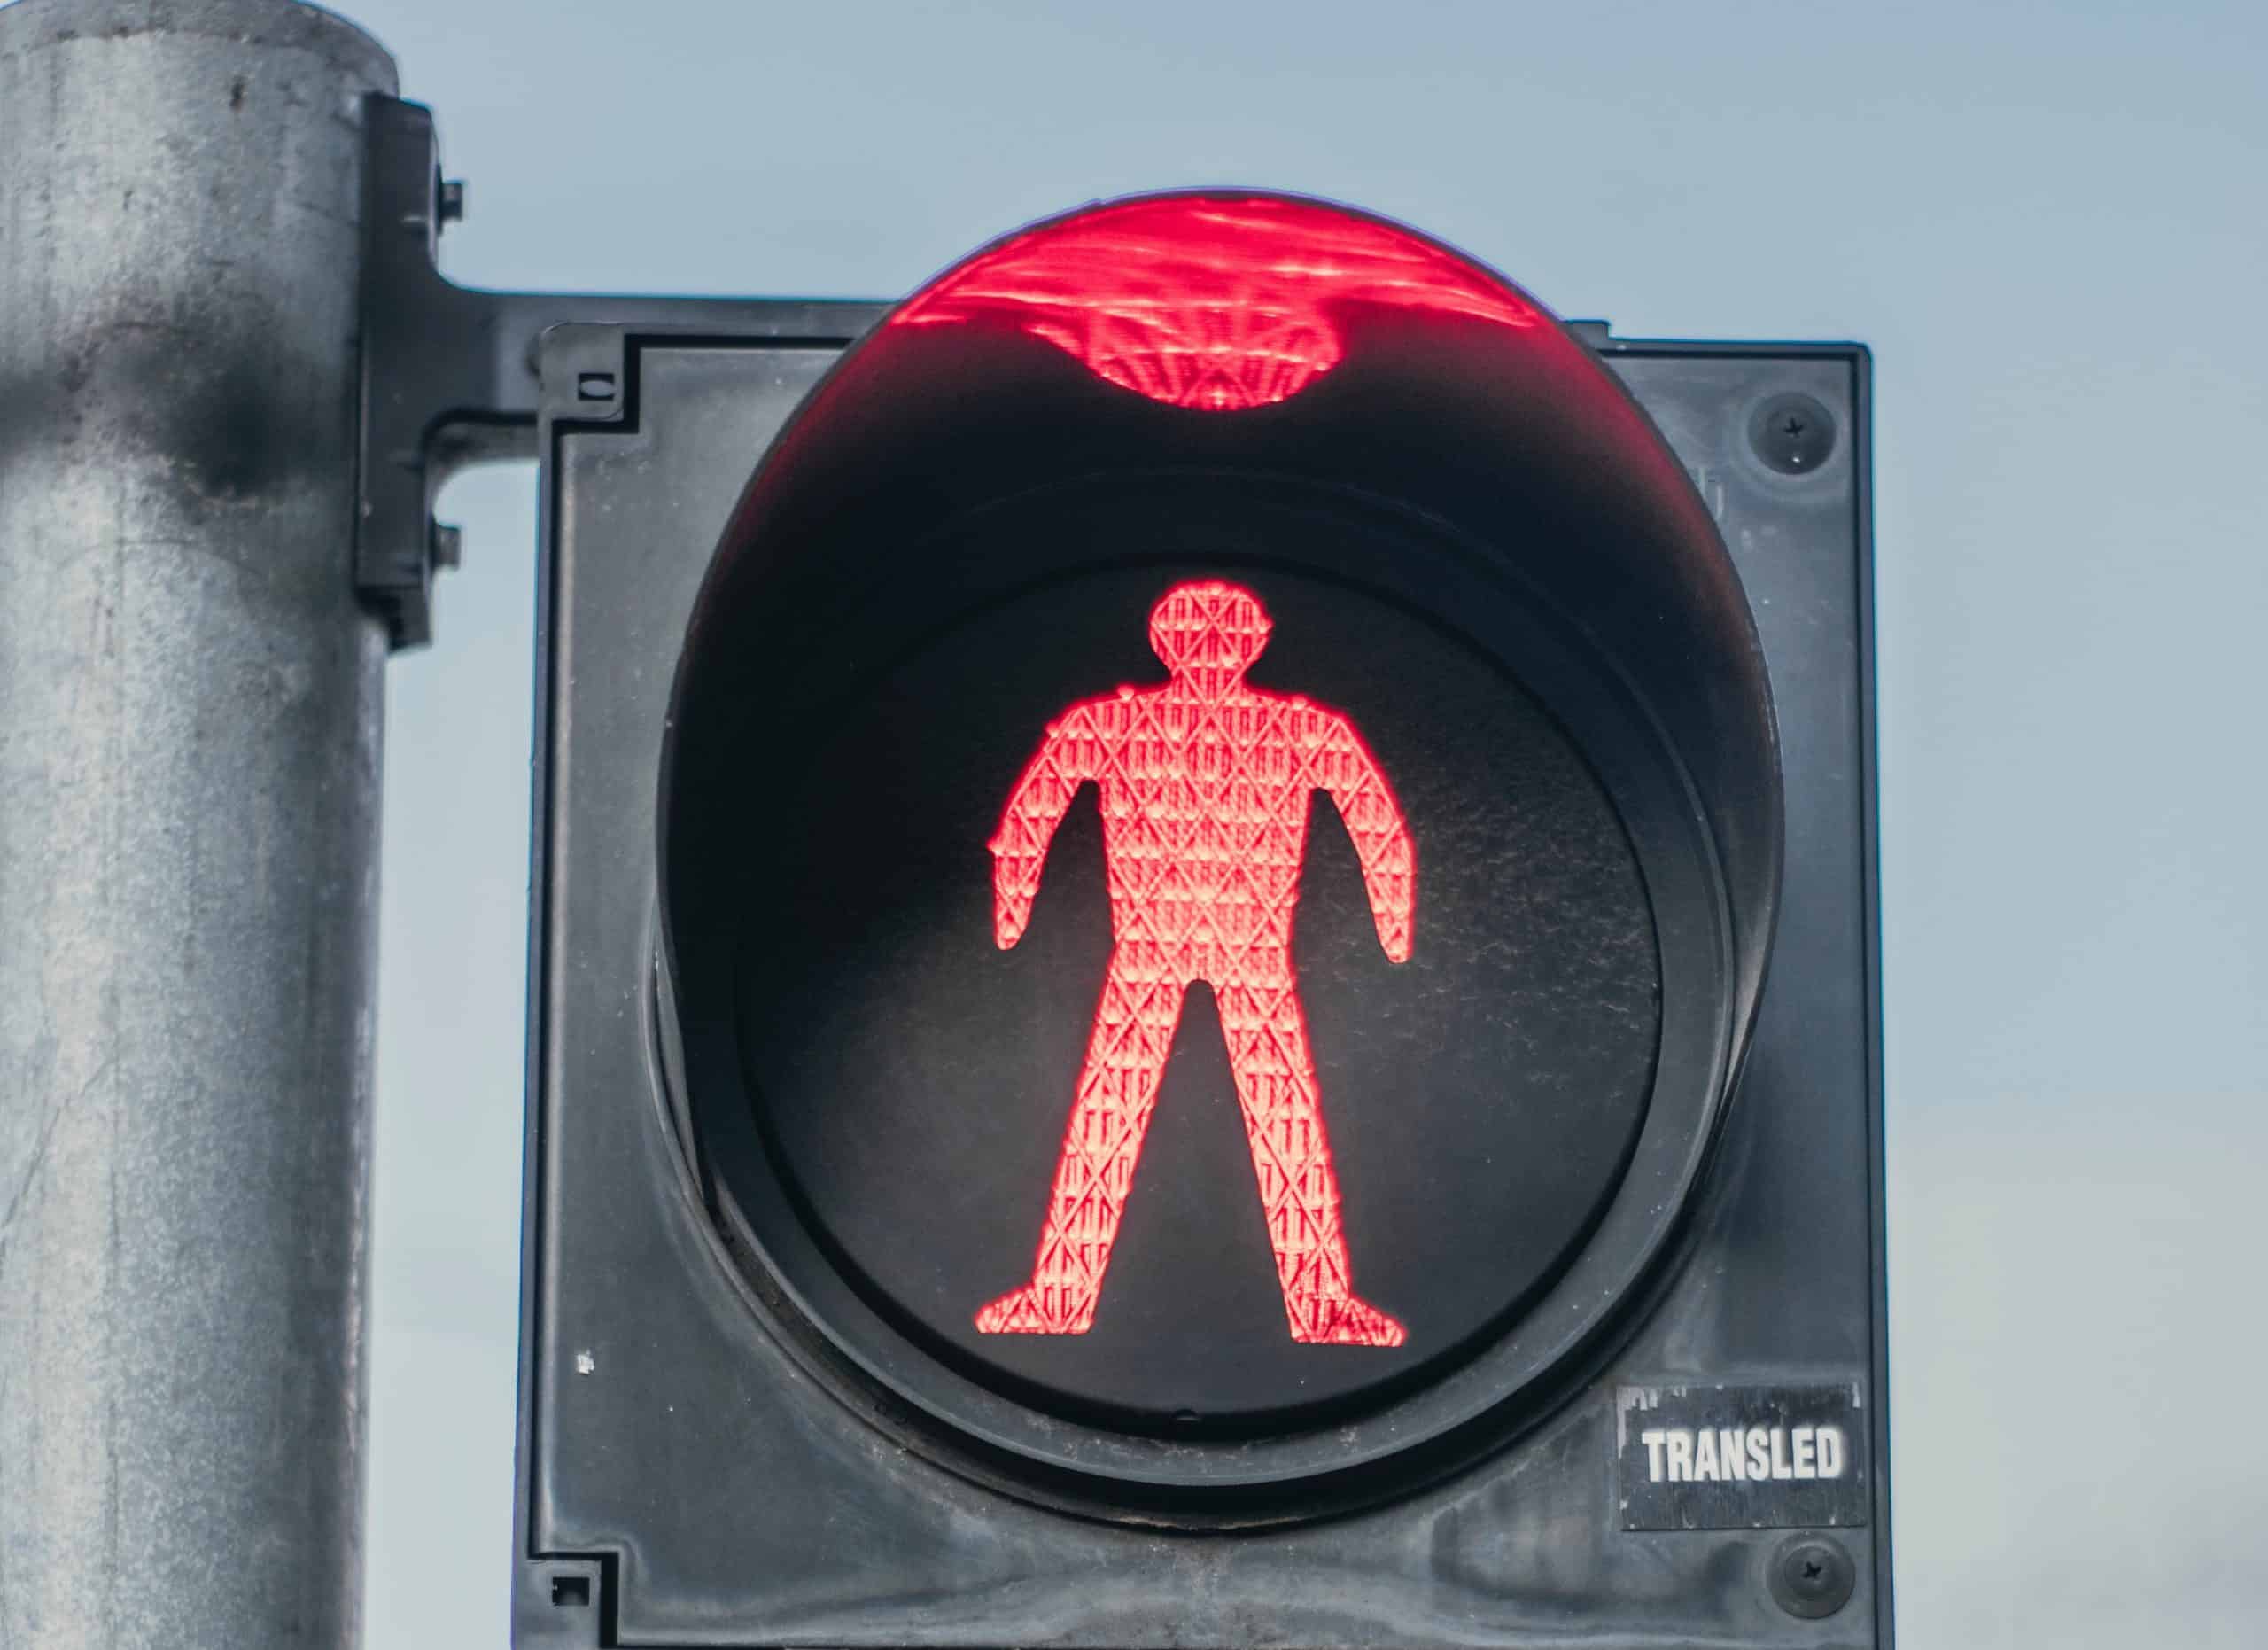 Pedestrian crossing sign showing don't walk